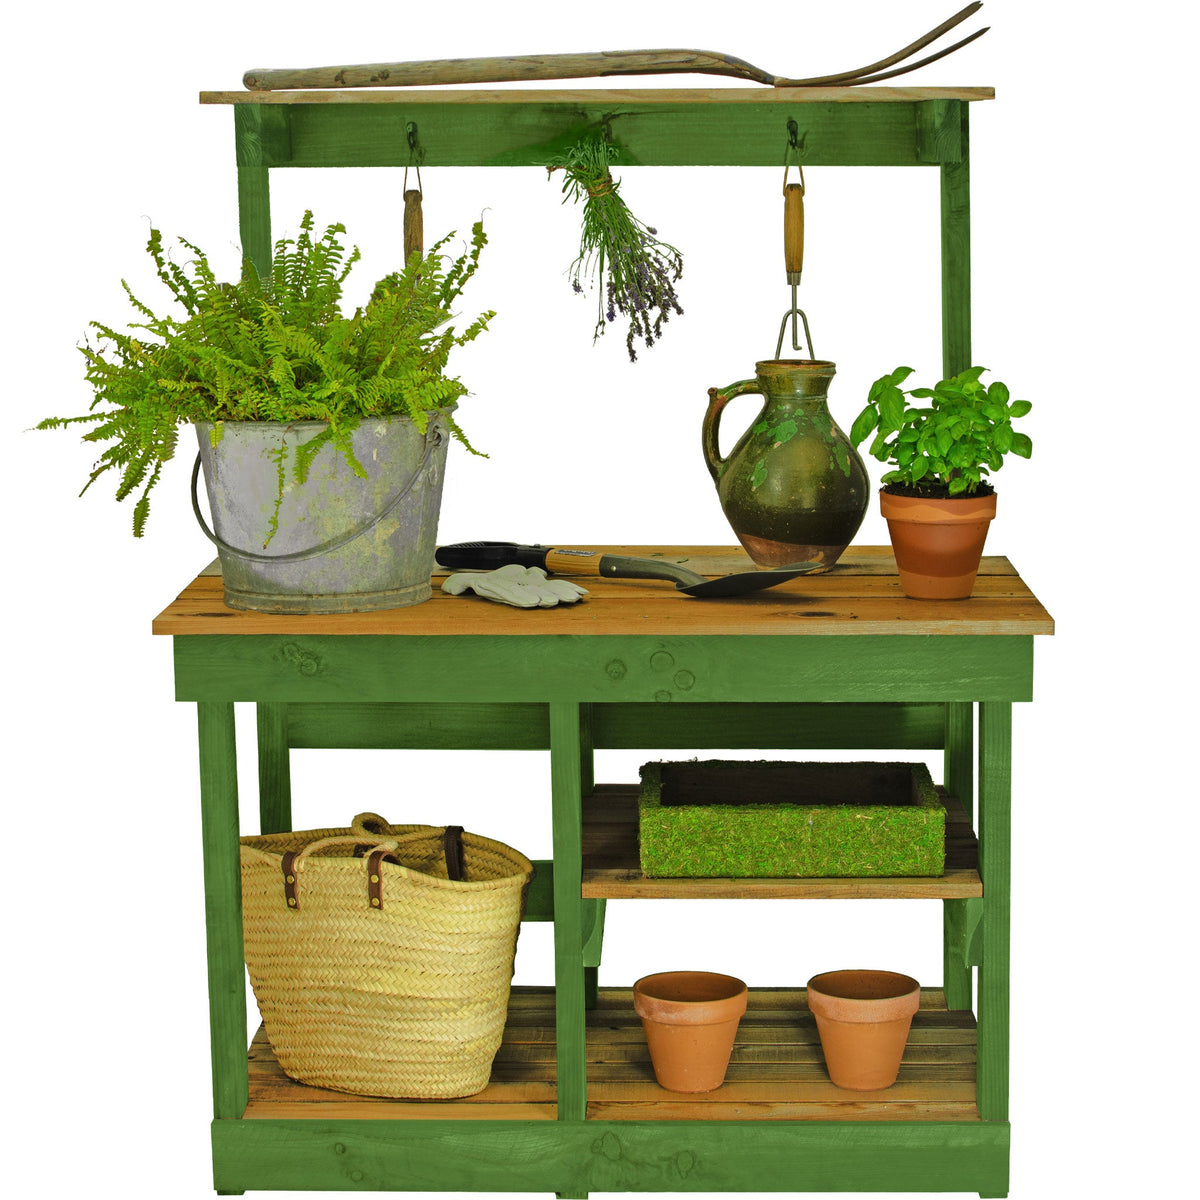 Introducing Lee Display's Handmade Rustic Gardening Workbench – a versatile masterpiece marrying practicality and rustic charm